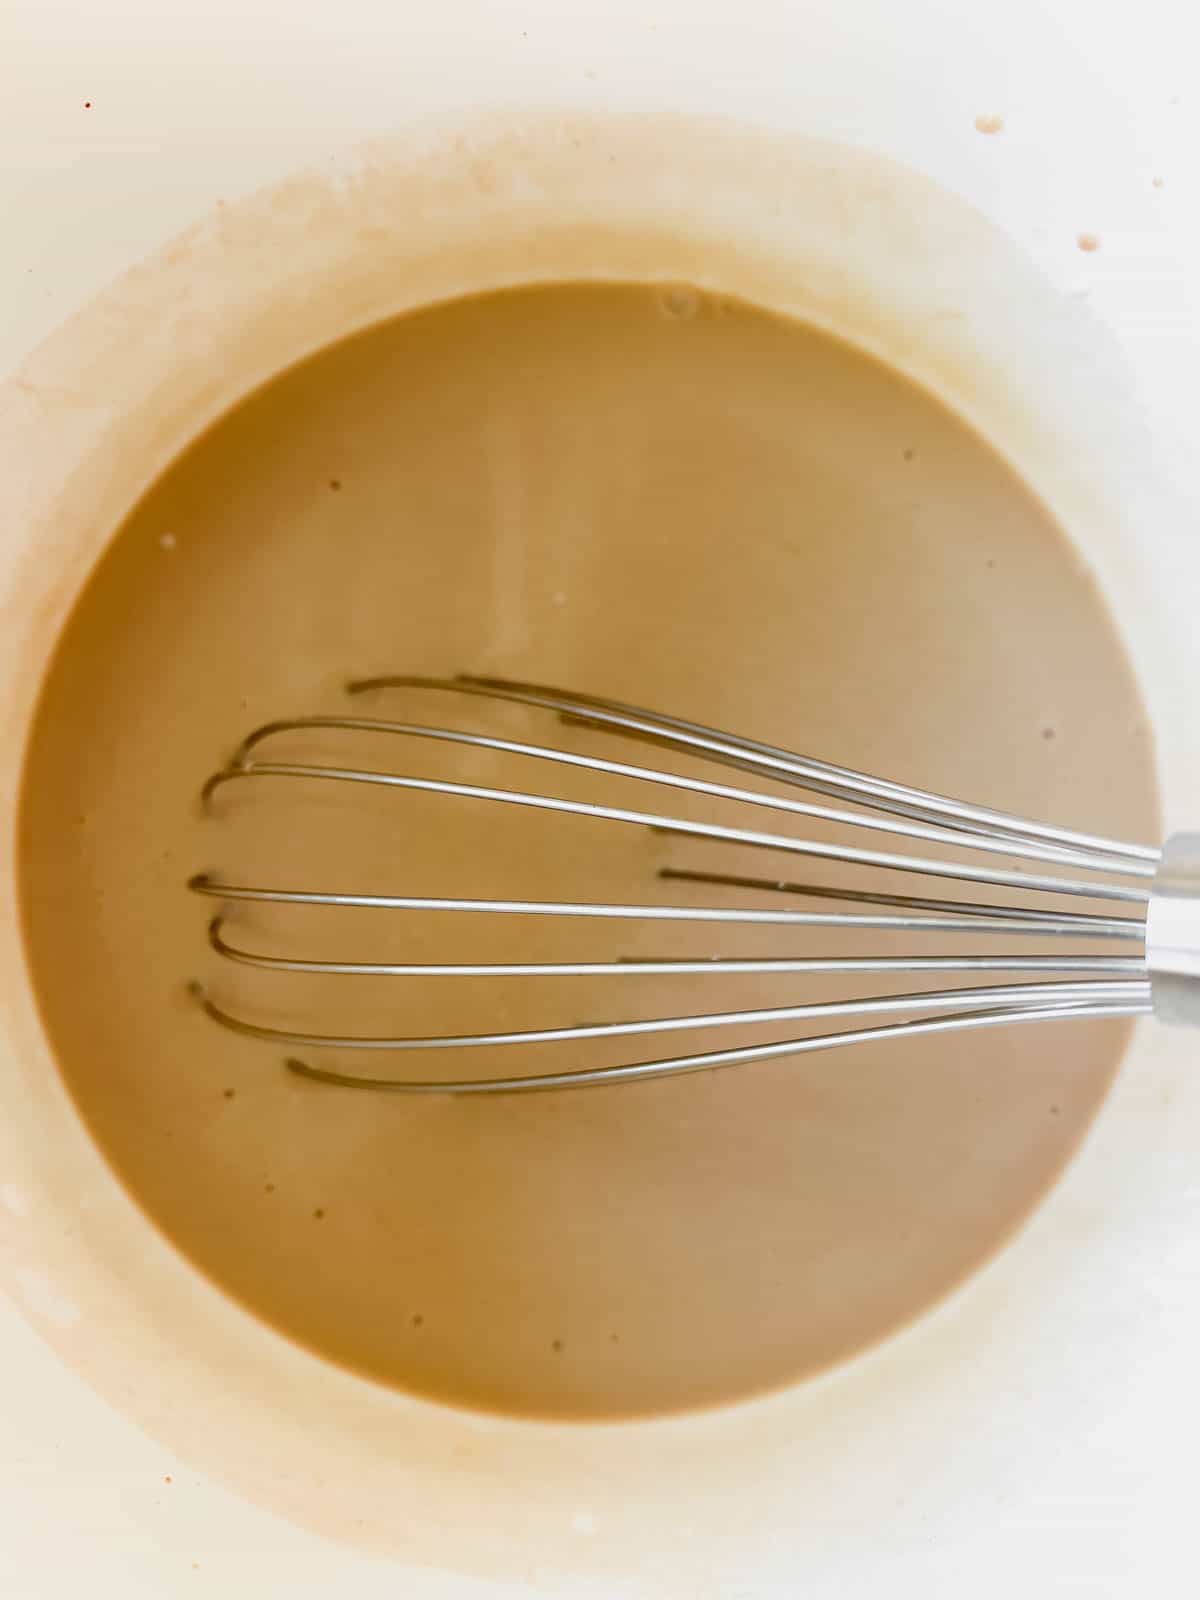 All the irish cream ingredients mixed together in a bowl.